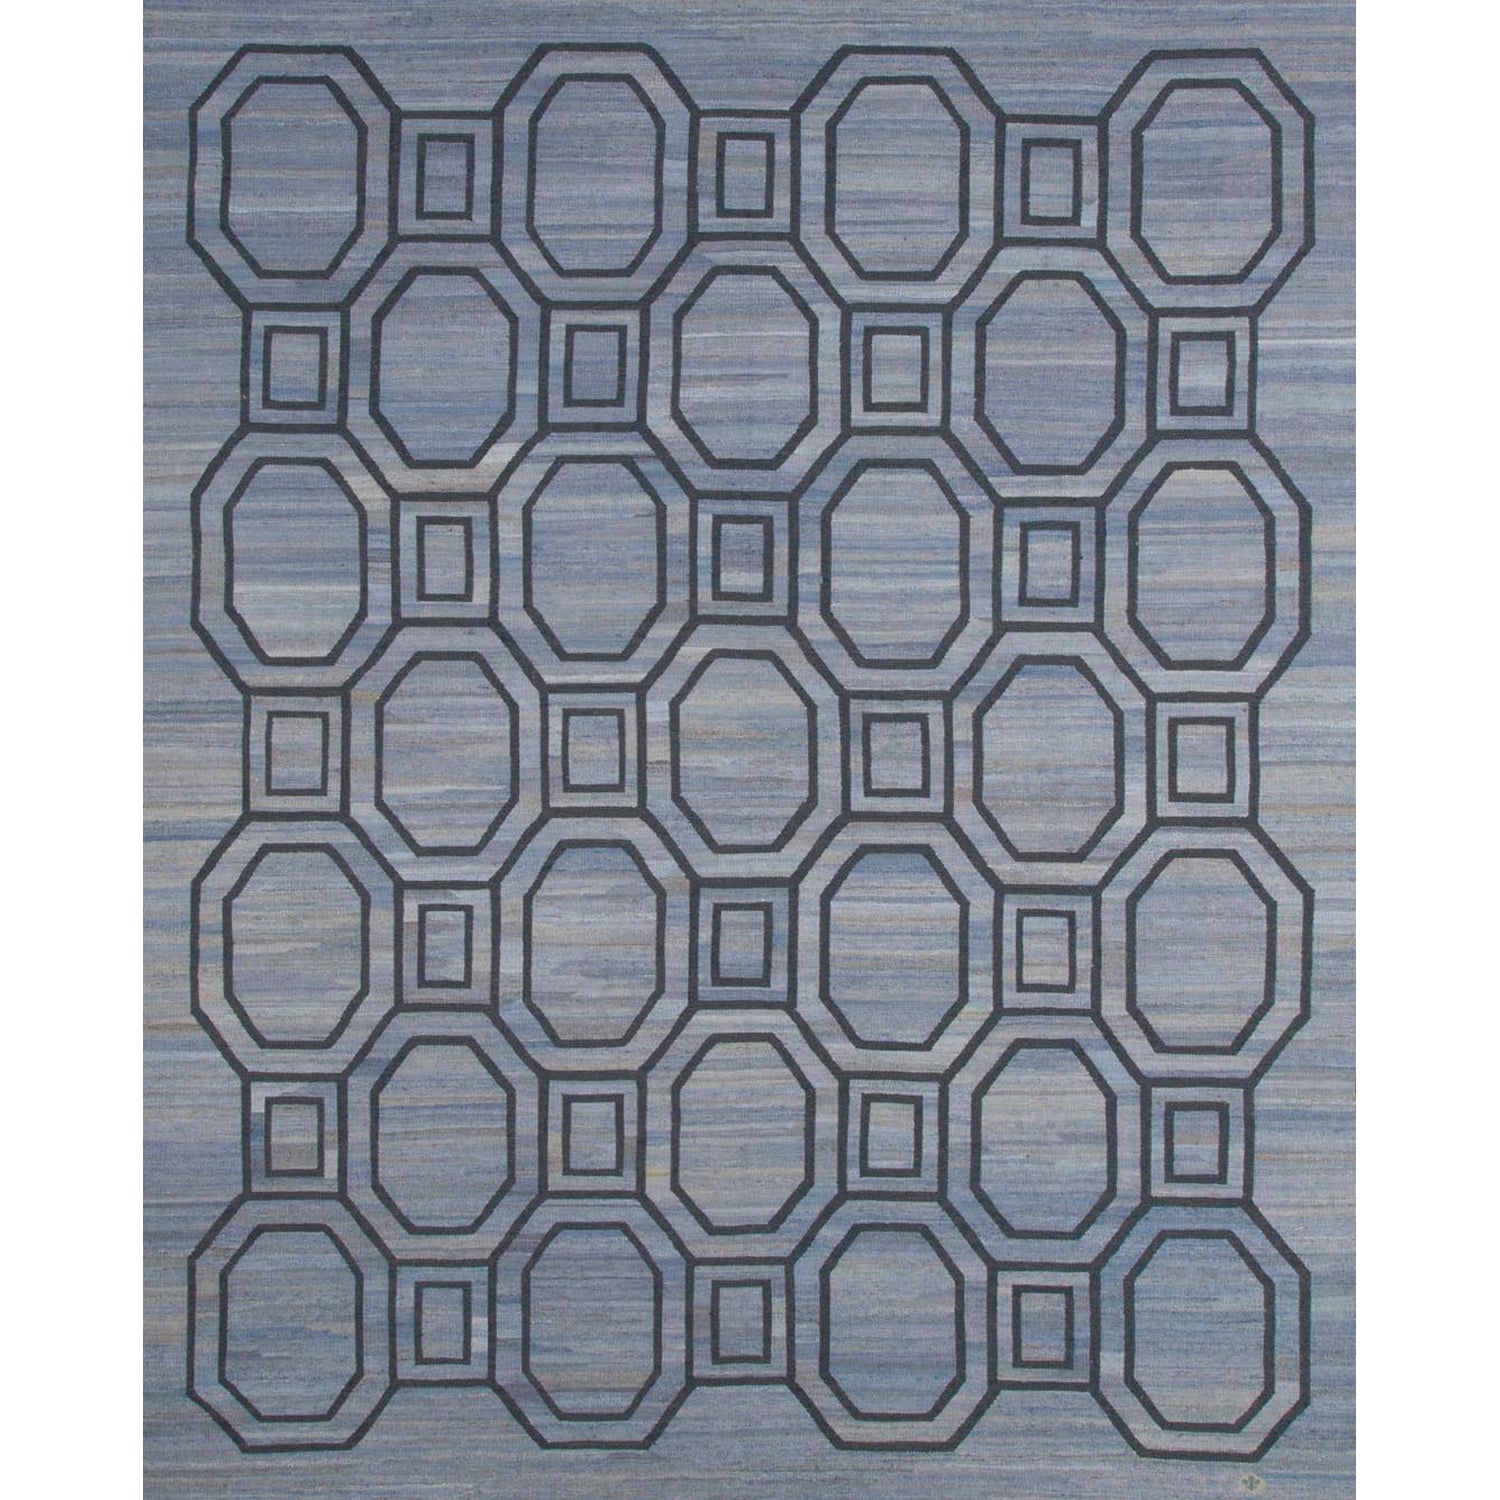 Rectangular rug with an interlocking octagon and square pattern in navy blue on a mottled blue background.